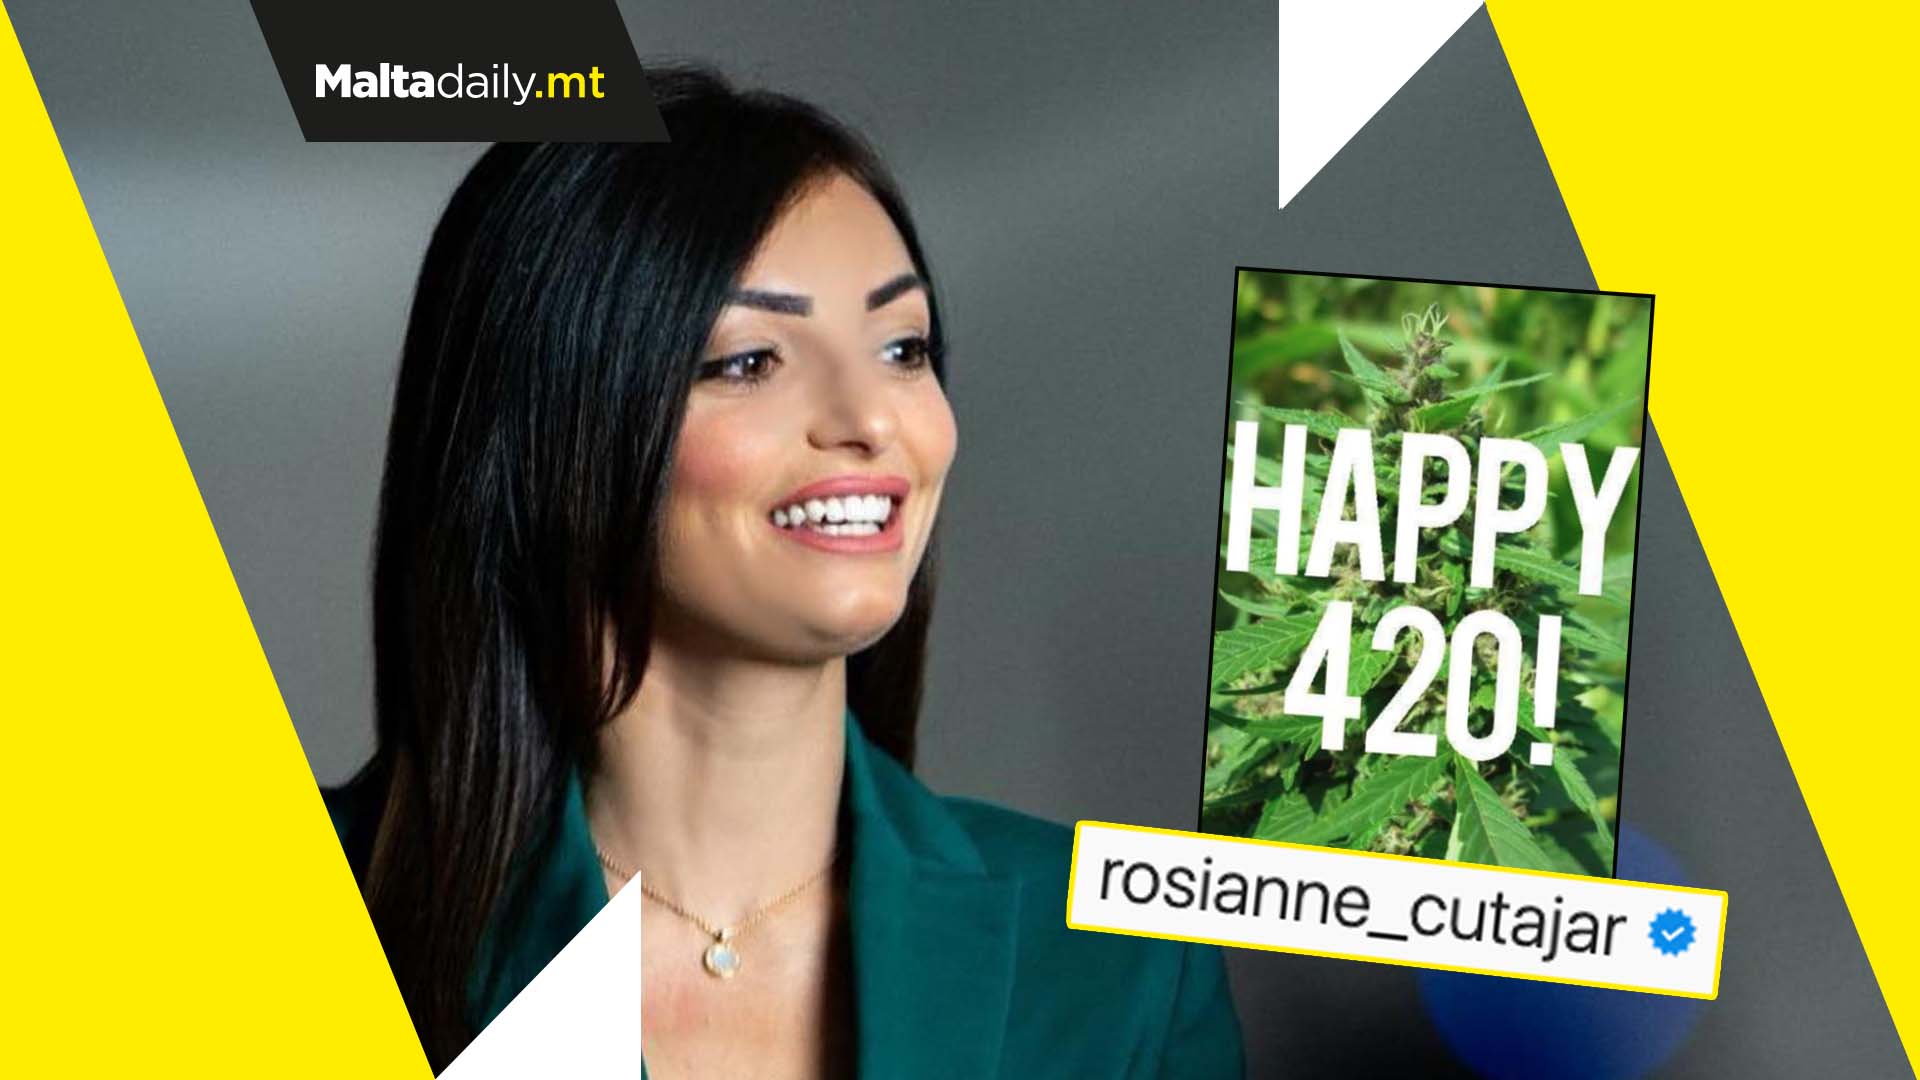 Labour MP Rosianne Cutajar commemorates 4/20 with an Instagram story